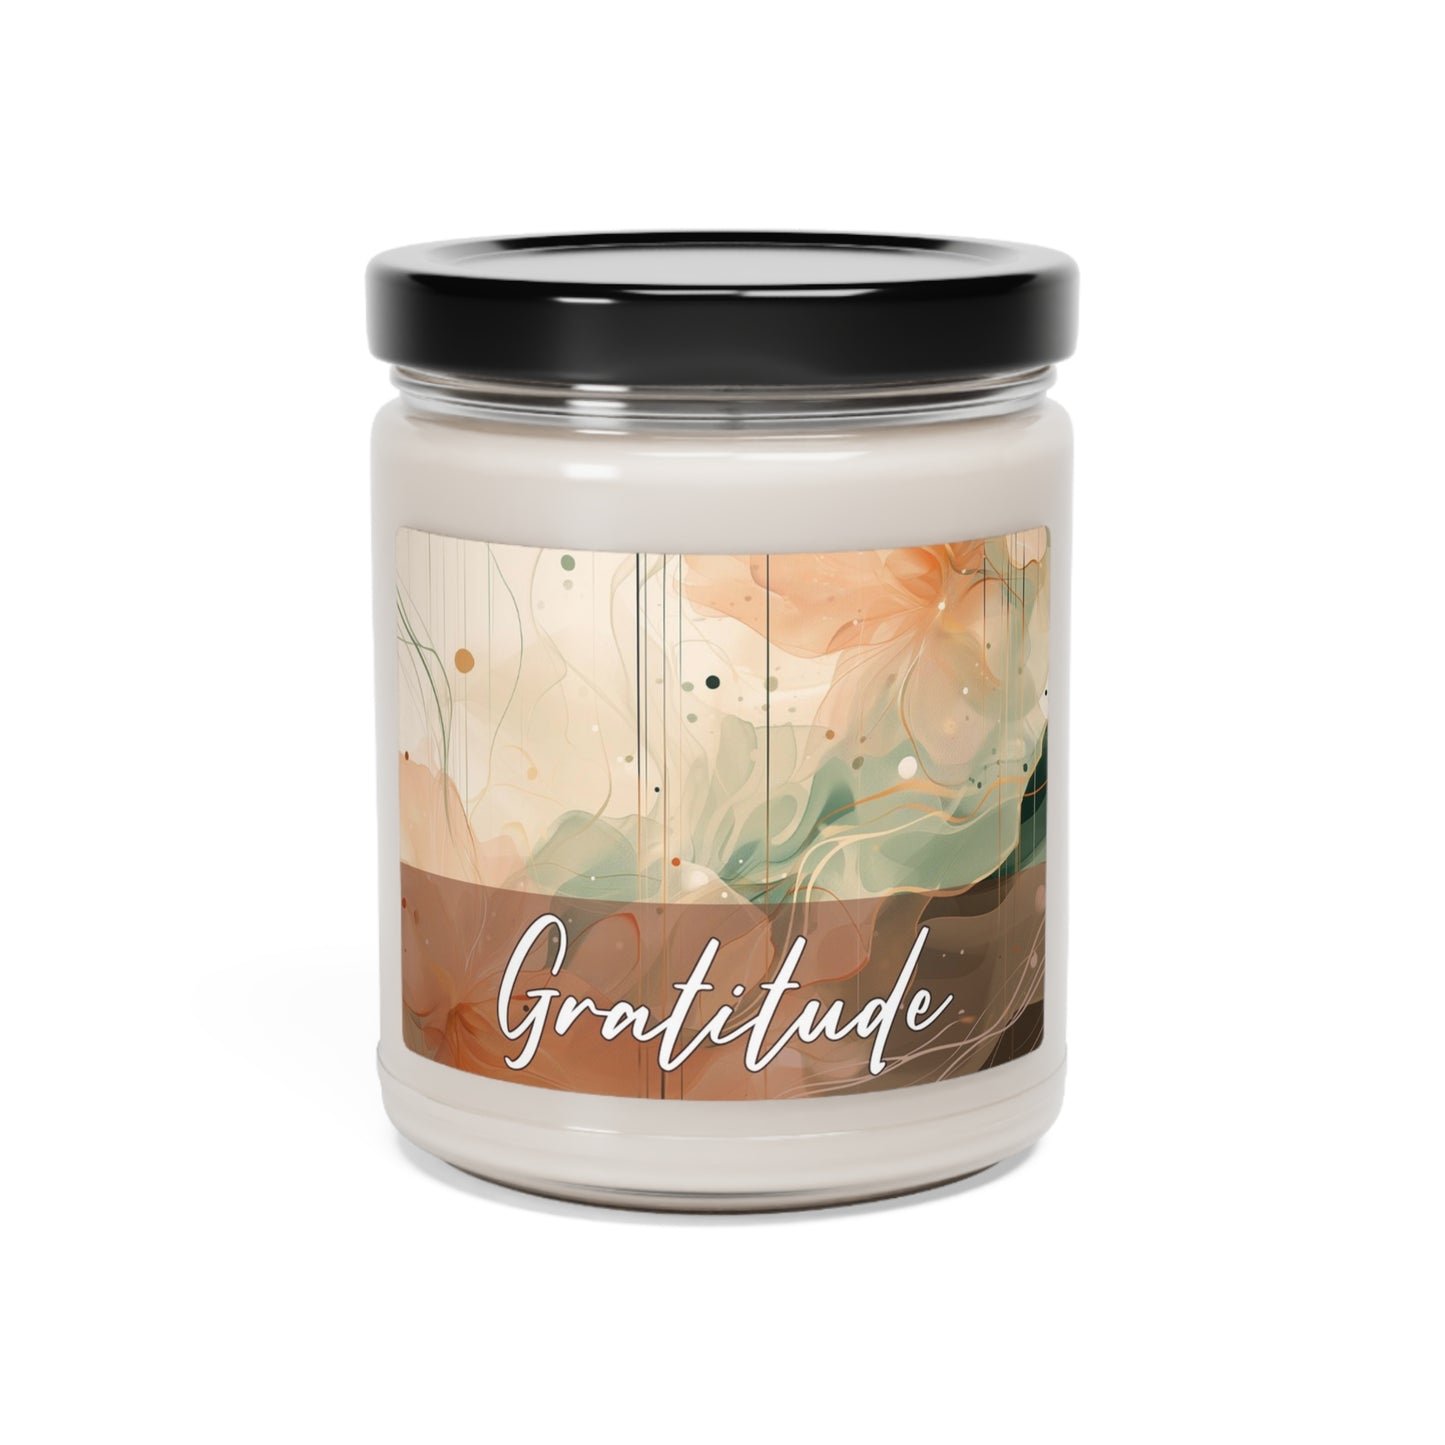 'Gratitude' Scented Soy Candle, 9oz